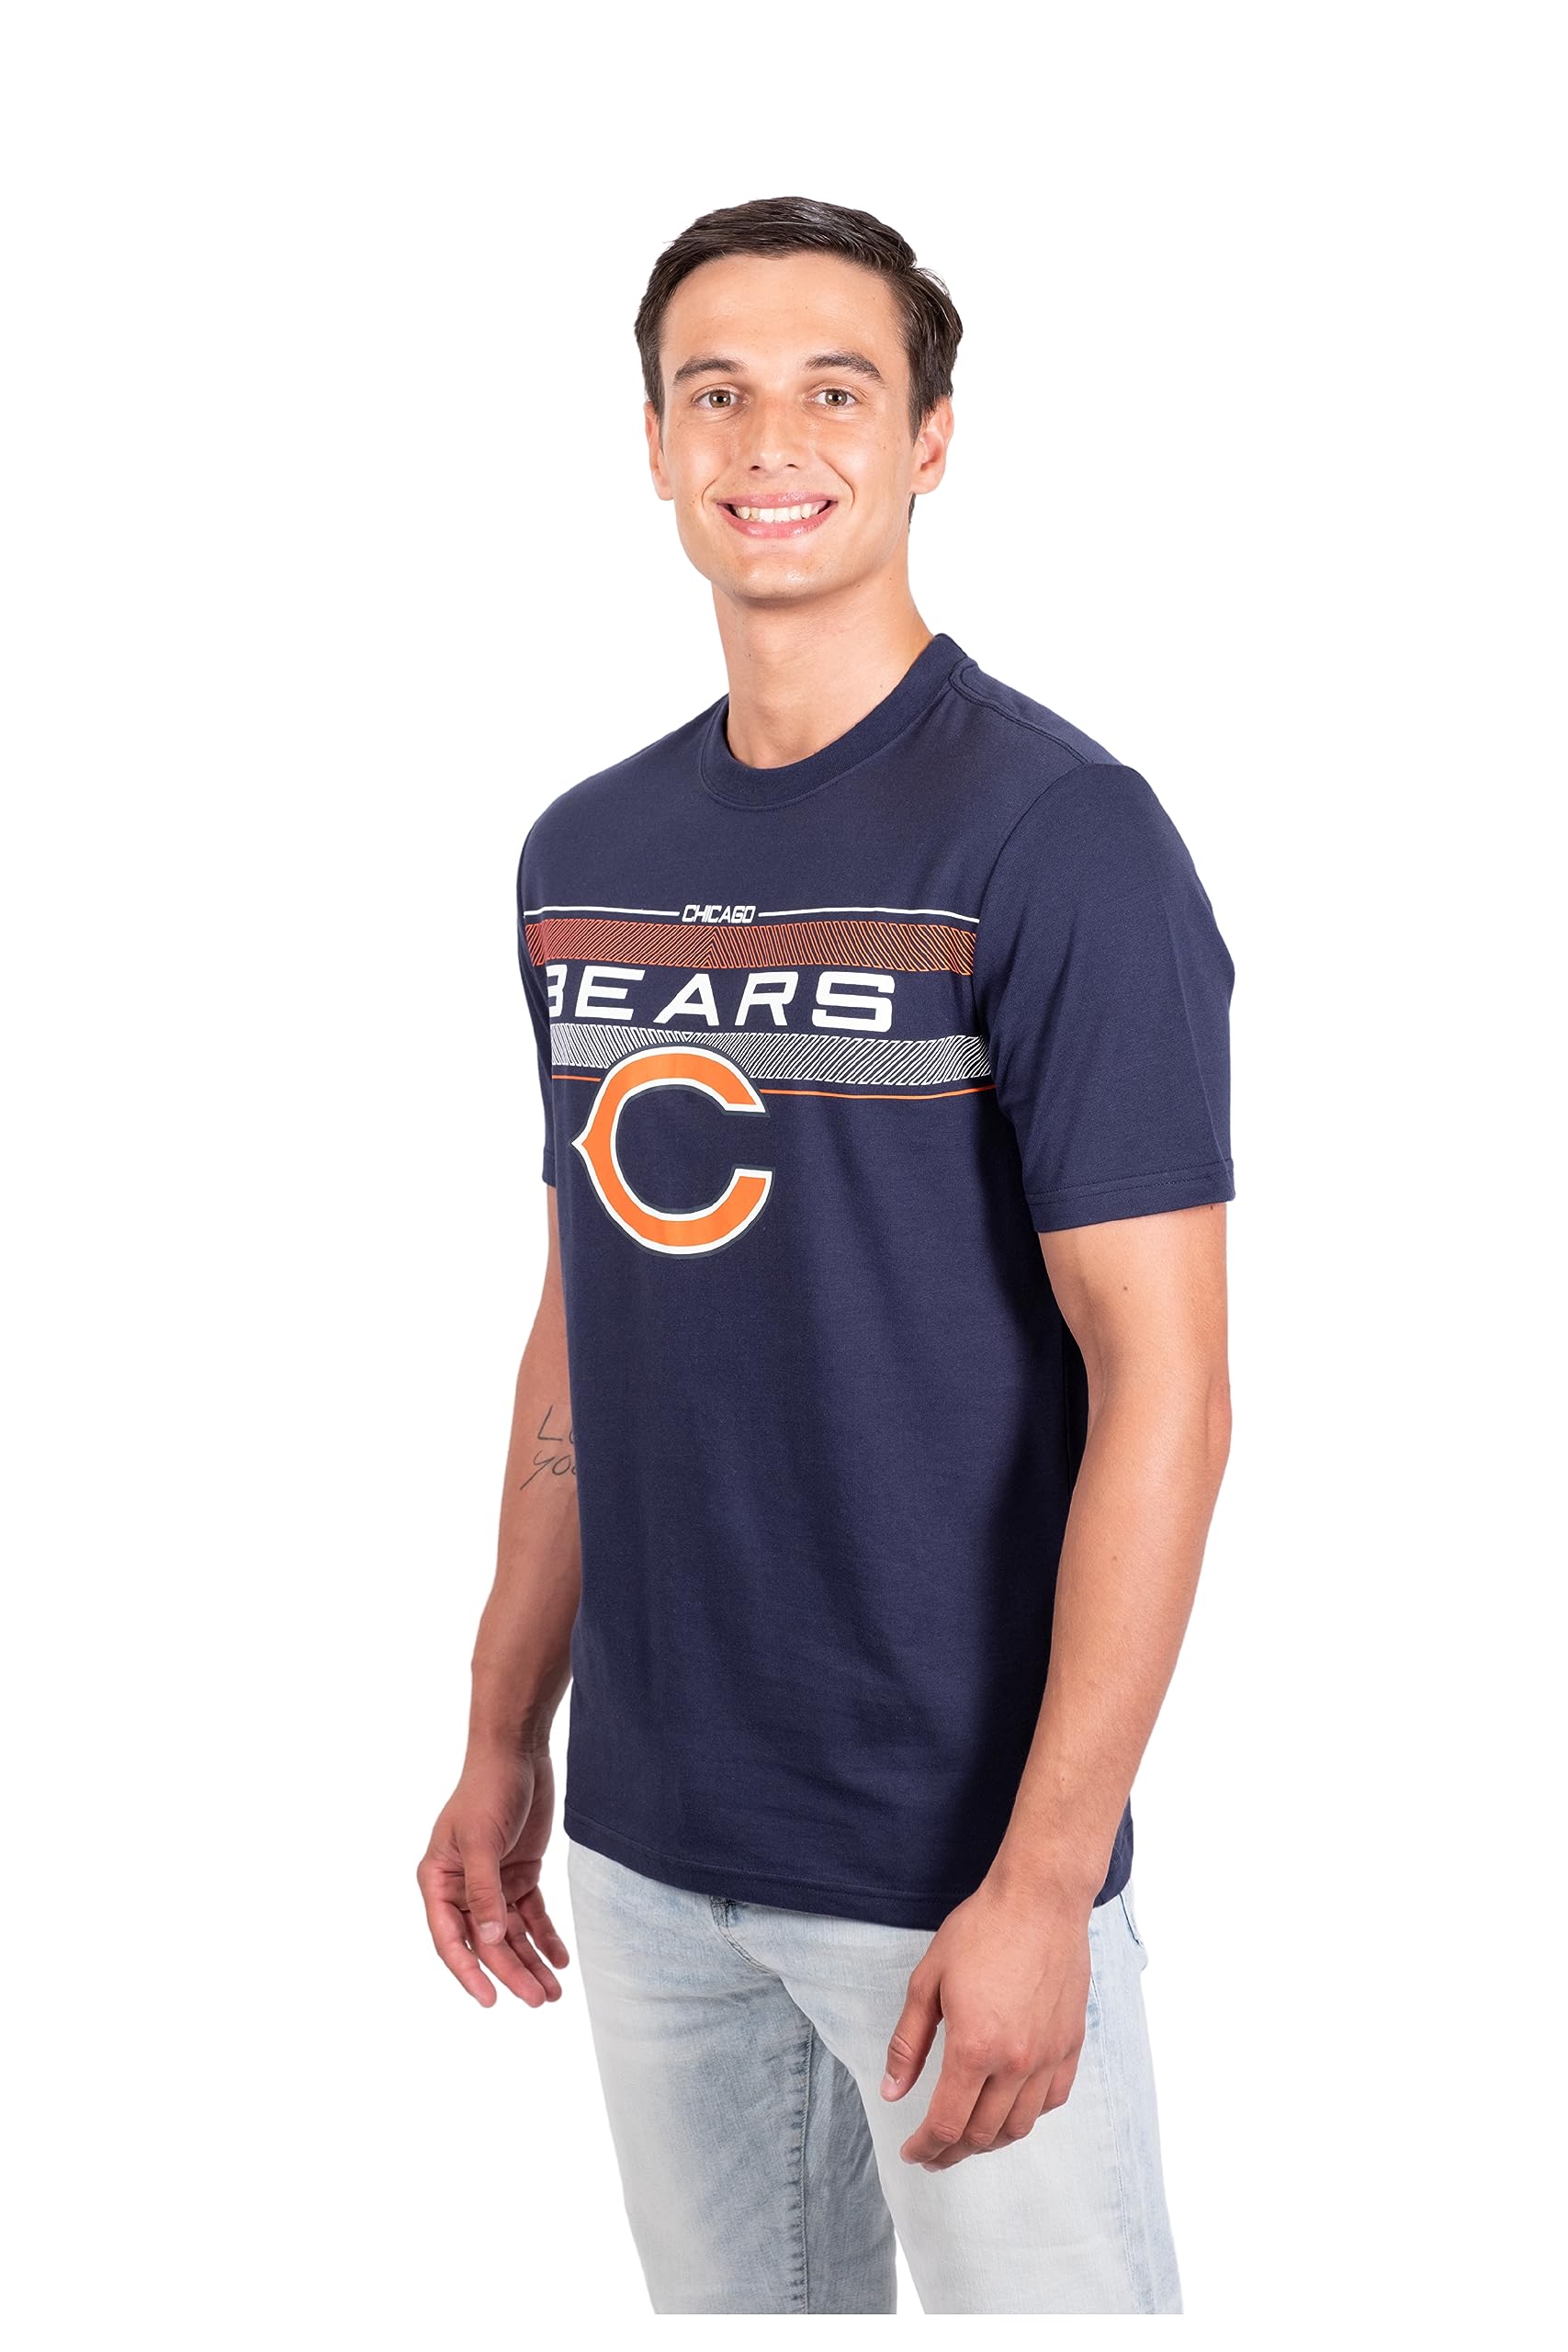 Ultra Game NFL Chicago Bears Mens Super Soft Ultimate Game Day Crew Neck T-Shirt|Chicago Bears - UltraGameShop